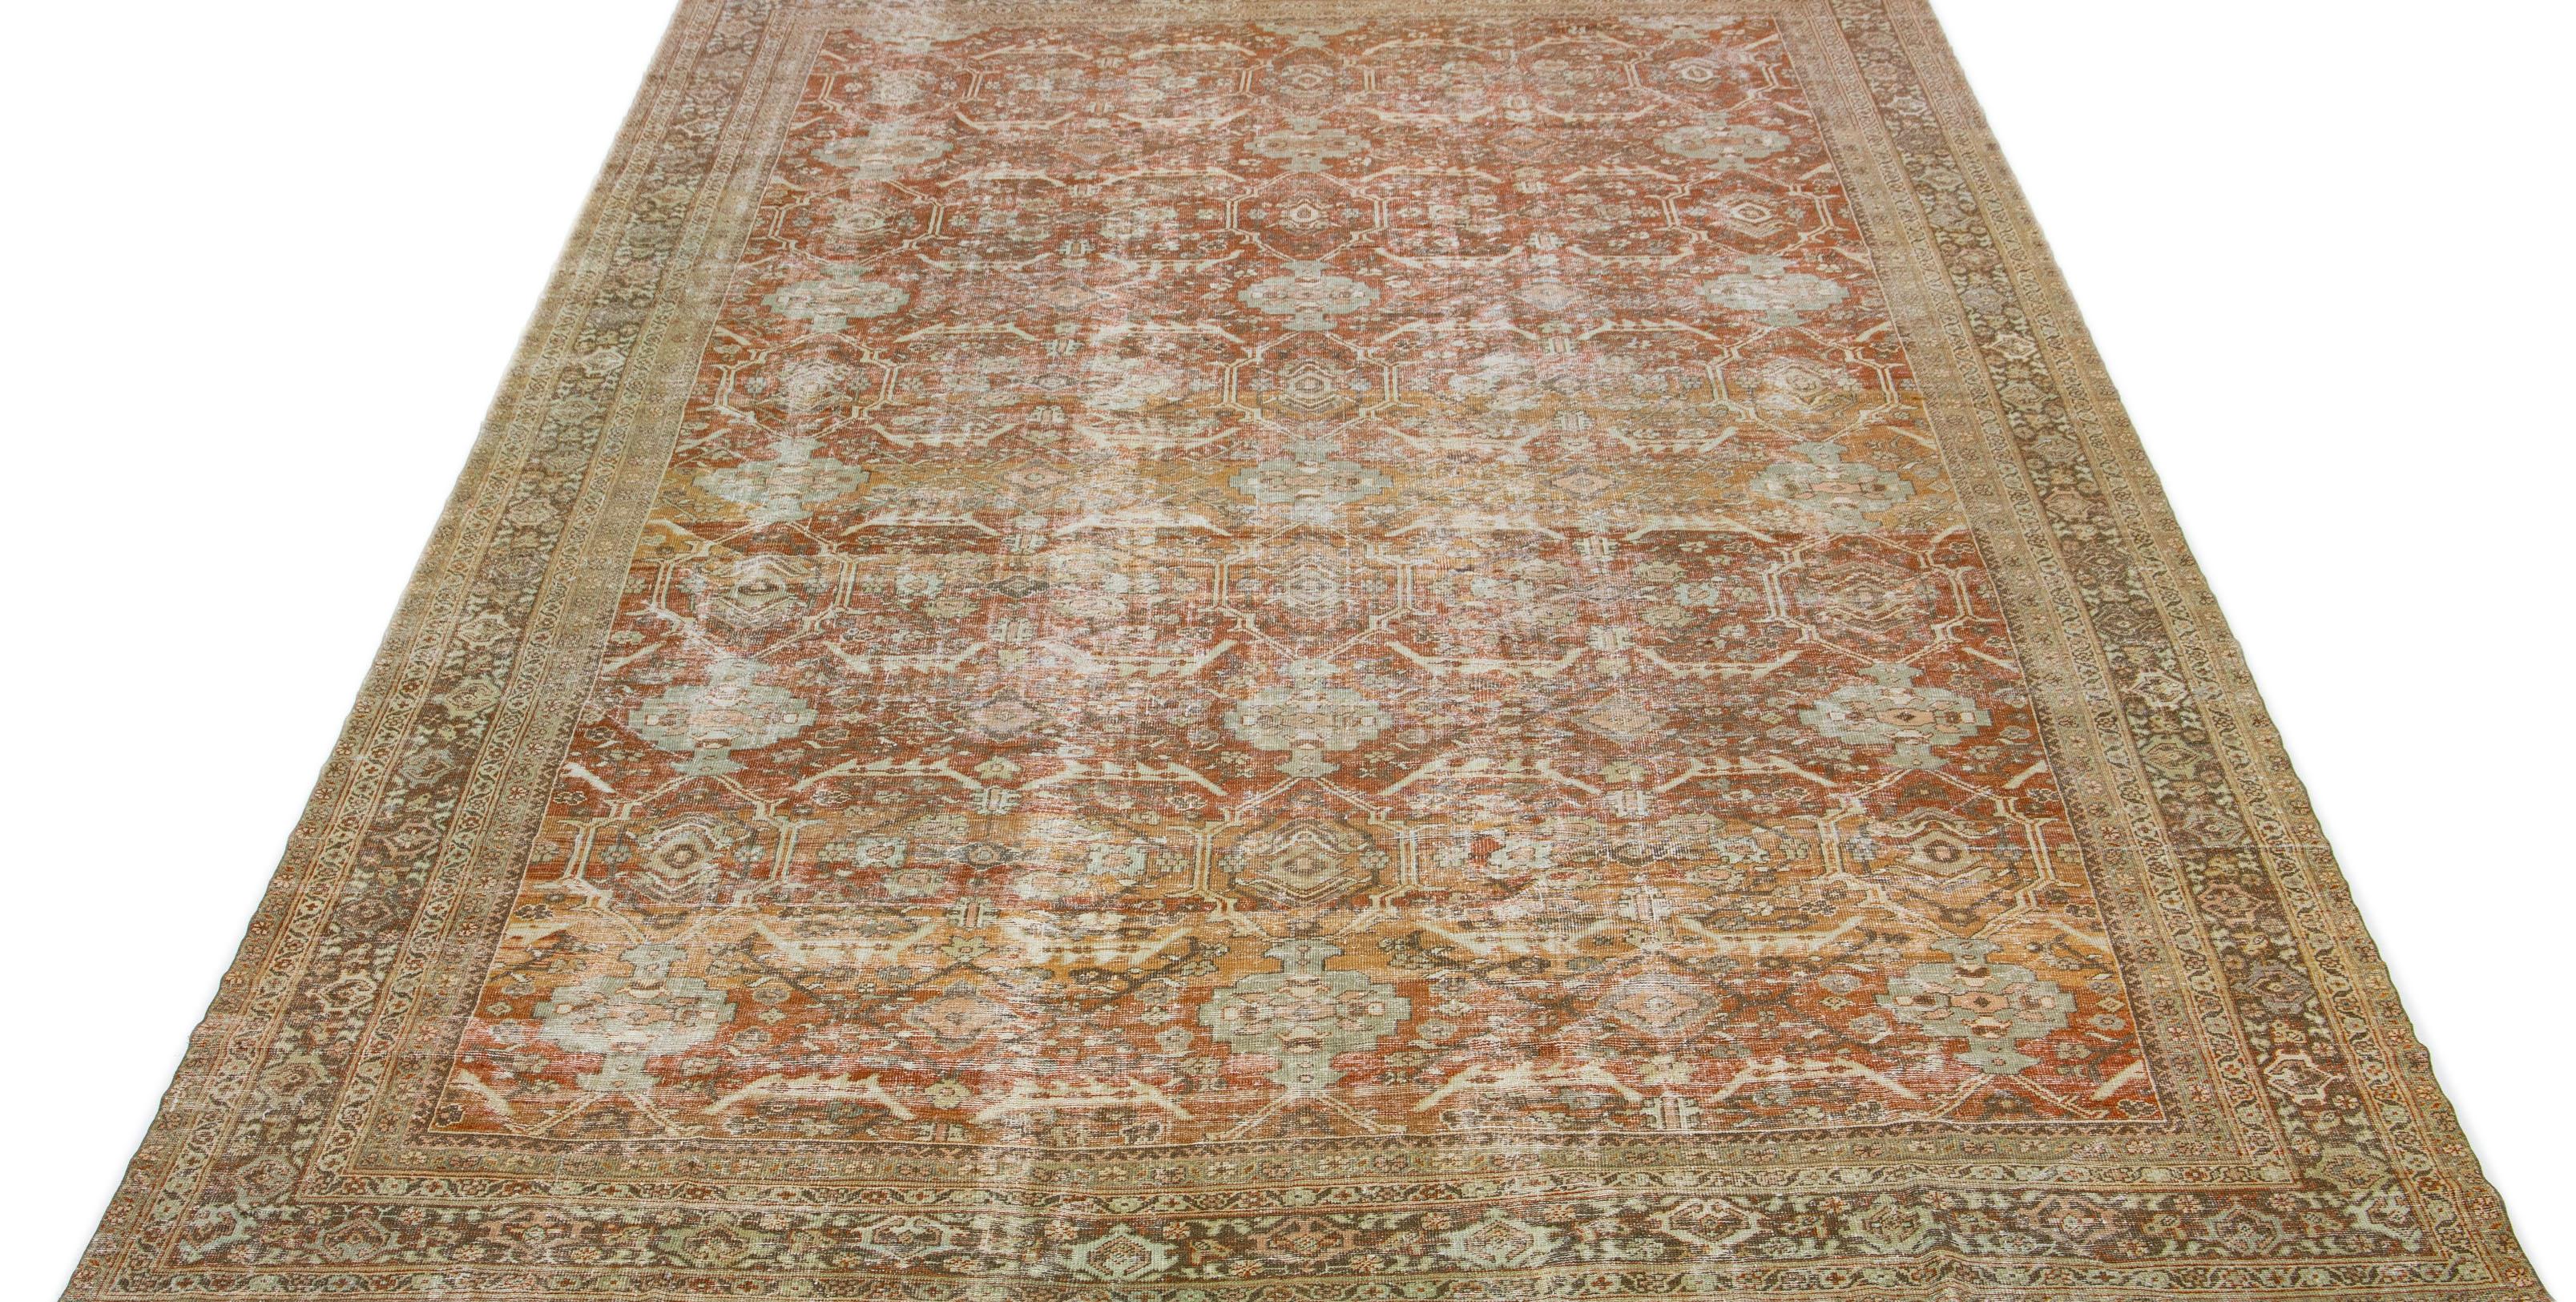 The 1920s vintage wool rug with hand-knotted craftsmanship features an All-over floral motif. Its primary color scheme consists of orange/rust complimented with blue, peach, and gray hues for a traditional appeal.

This rug measures 11' x 17'7